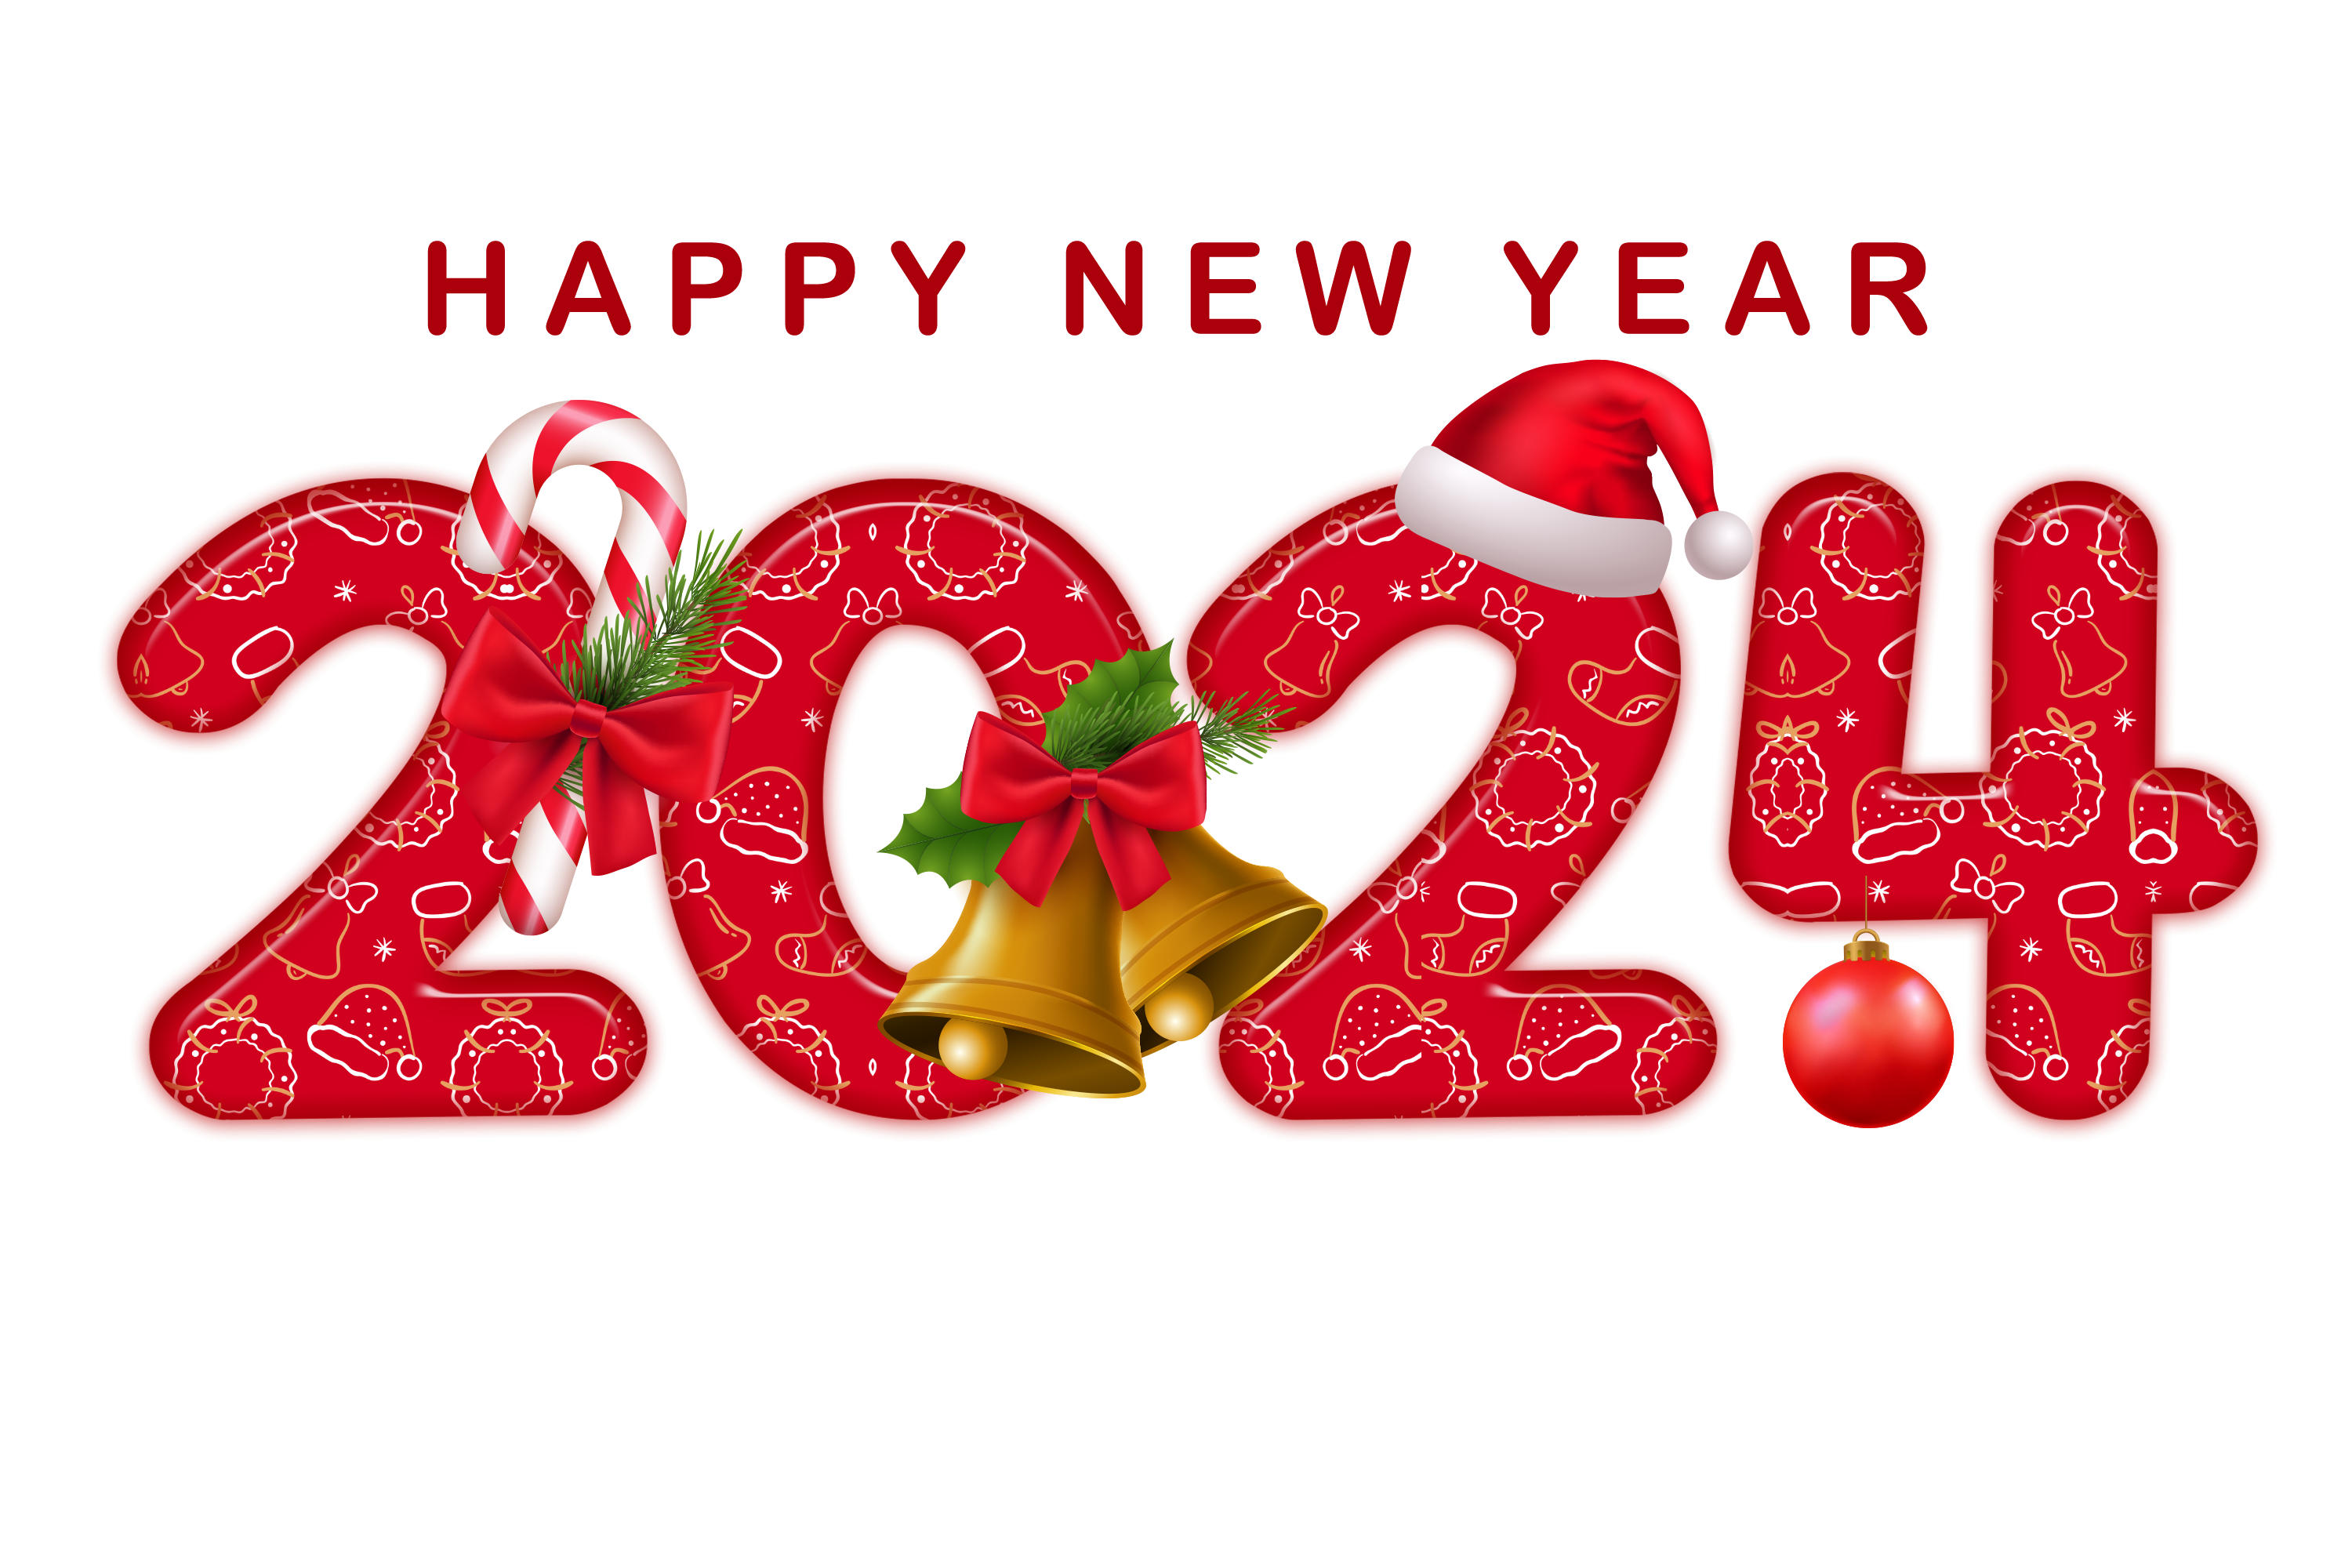 Merry Christmas And Happy New Year Png - Free Transparent PNG Download -  PNGkey